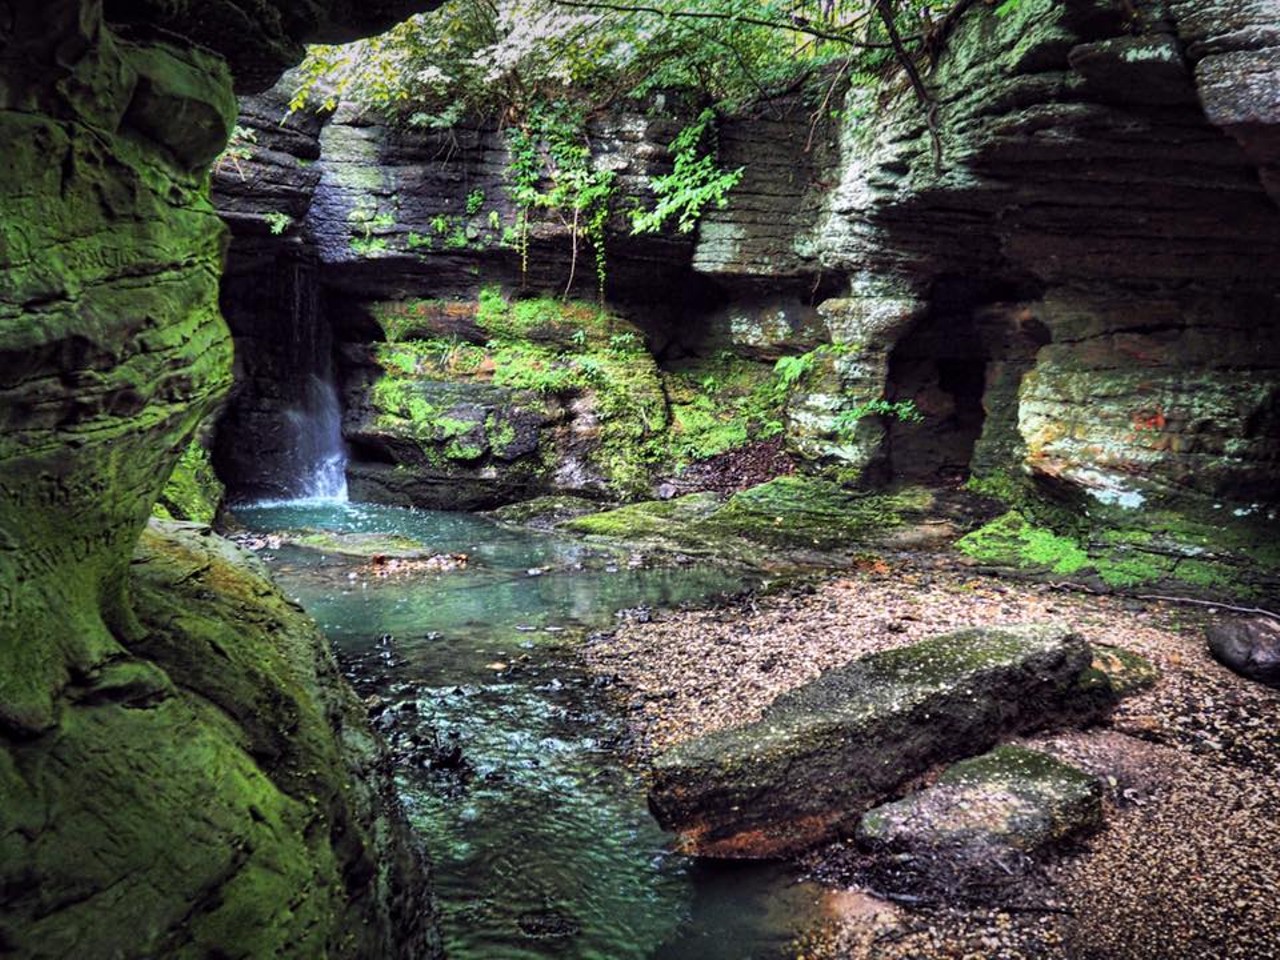  Cat&#146;s Den Falls
16802 Catsden Rd., Chagrin Falls
This small but fun waterfall flows from a &#147;den&#148; through one of only 12 documented natural arches in Ohio. Cat's Den Falls is about a 45 minute drive from Cleveland.
Photo via 
Mike Wetmore/Facebook